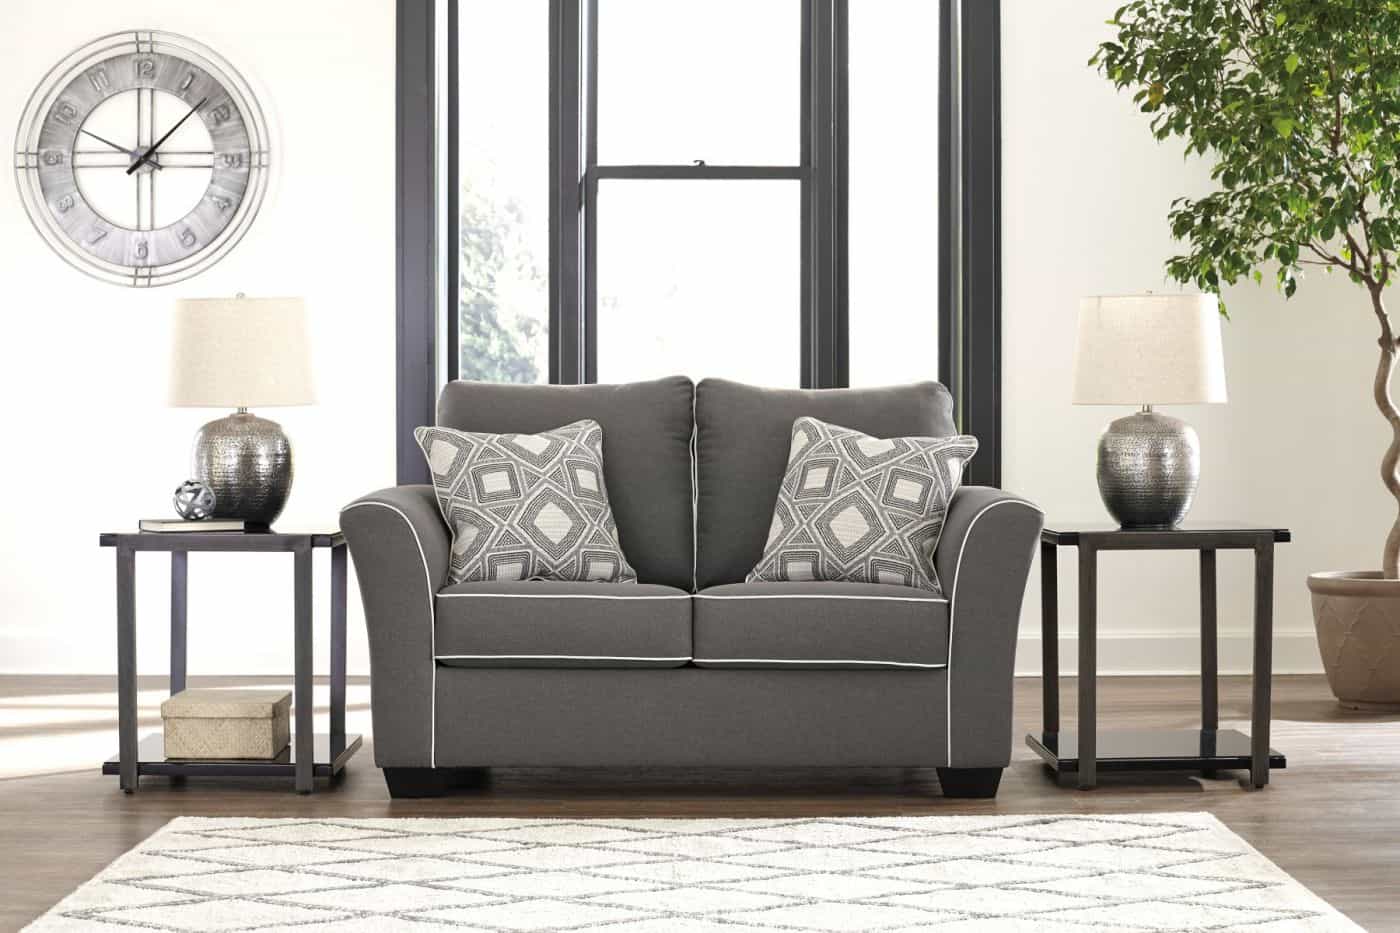 Domani-3-Seater-2-Seater-Armchair-Ottoman-Grey-Charcoal-Sofa-Suite-Couch-Living-Lounge-Fabric-Microfiber-Paphos-Furniture-Cyprus